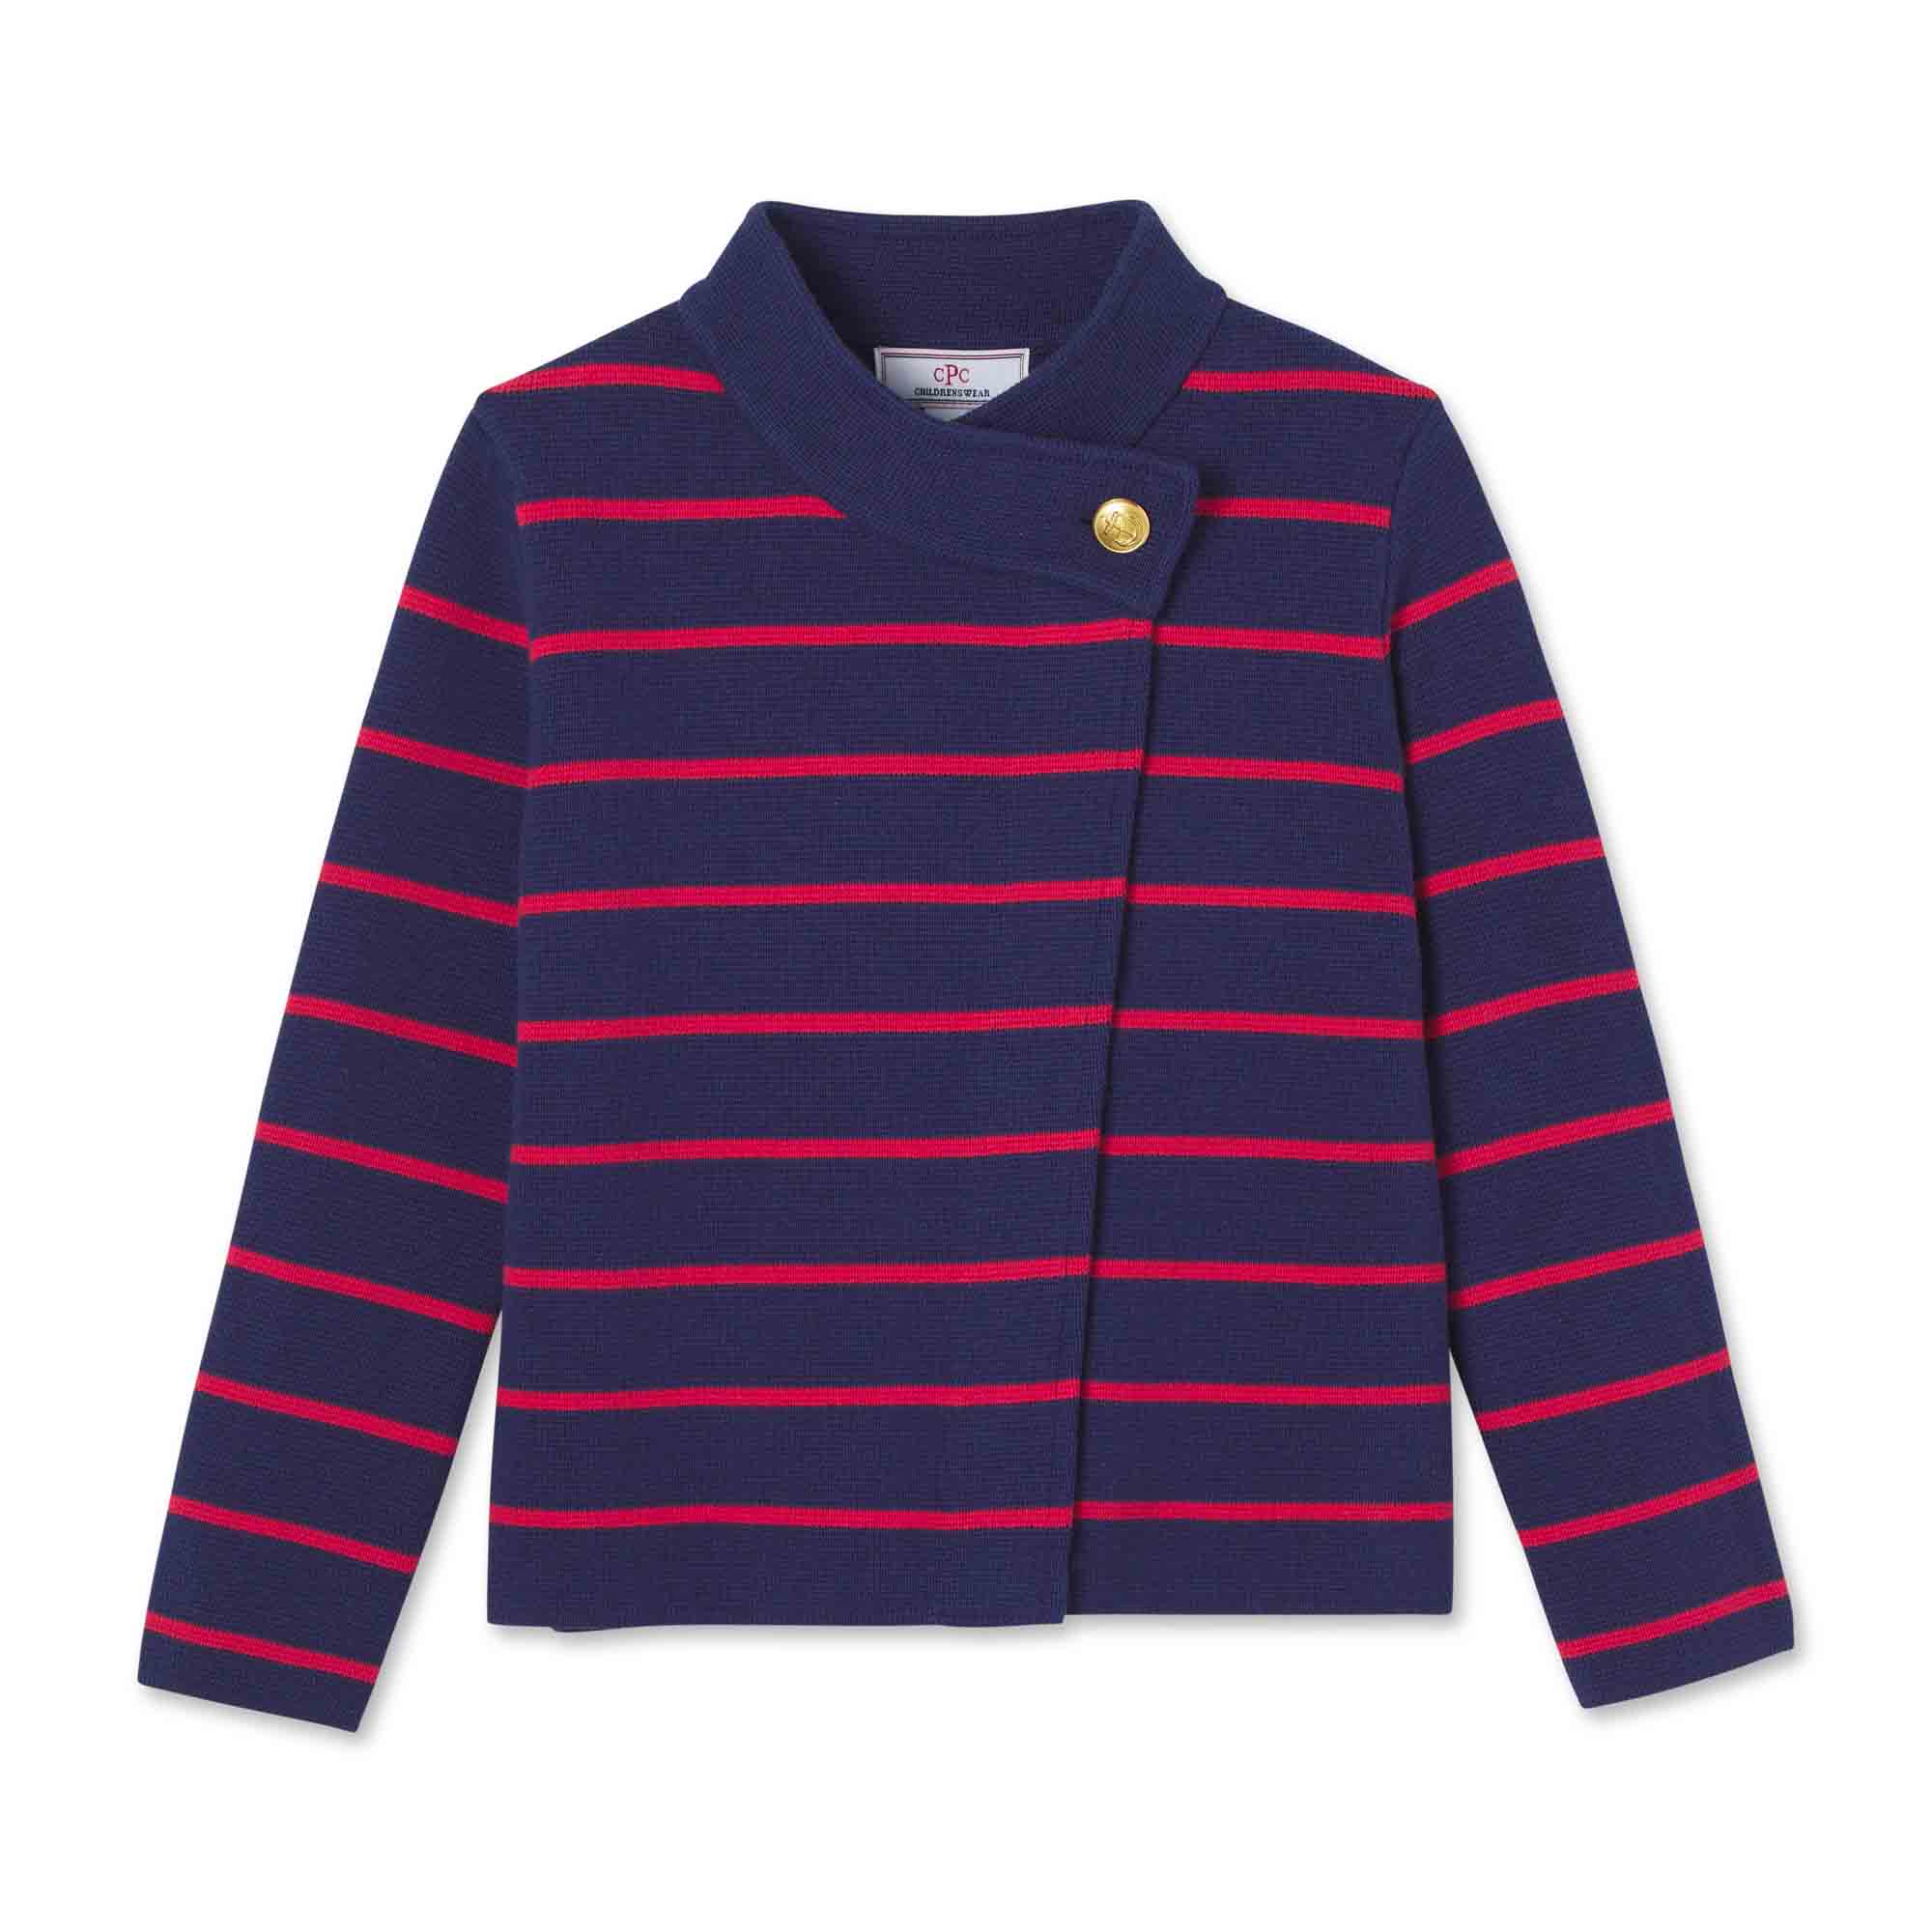 Emery Striped Button Sweater, Blue Ribbon with Mineral Red Stripes